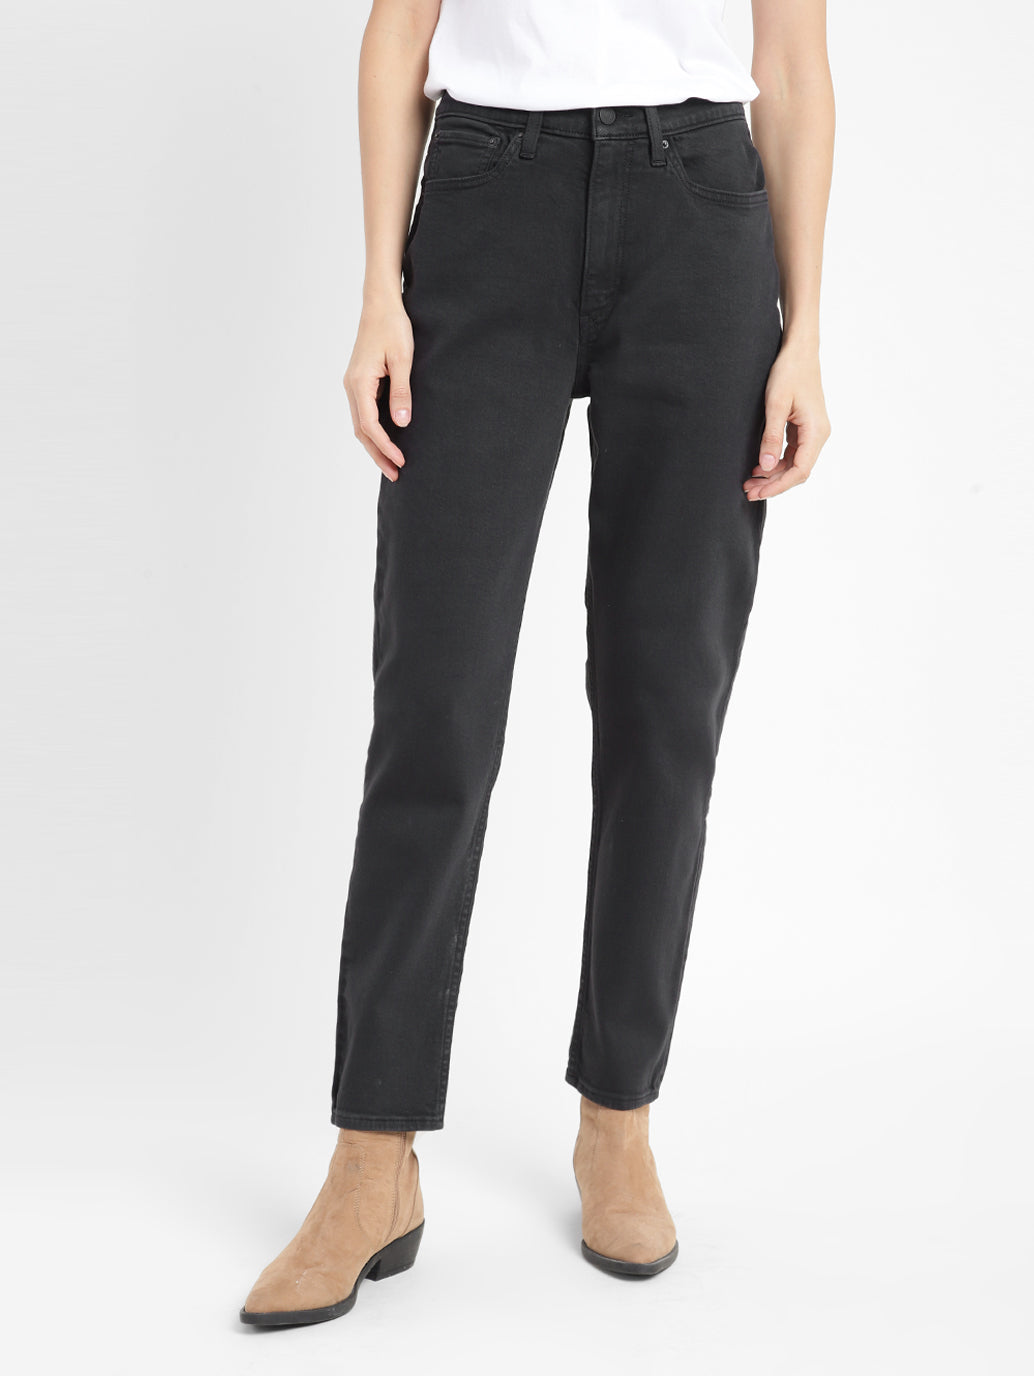 Women's High-Waisted Tapered Jeans